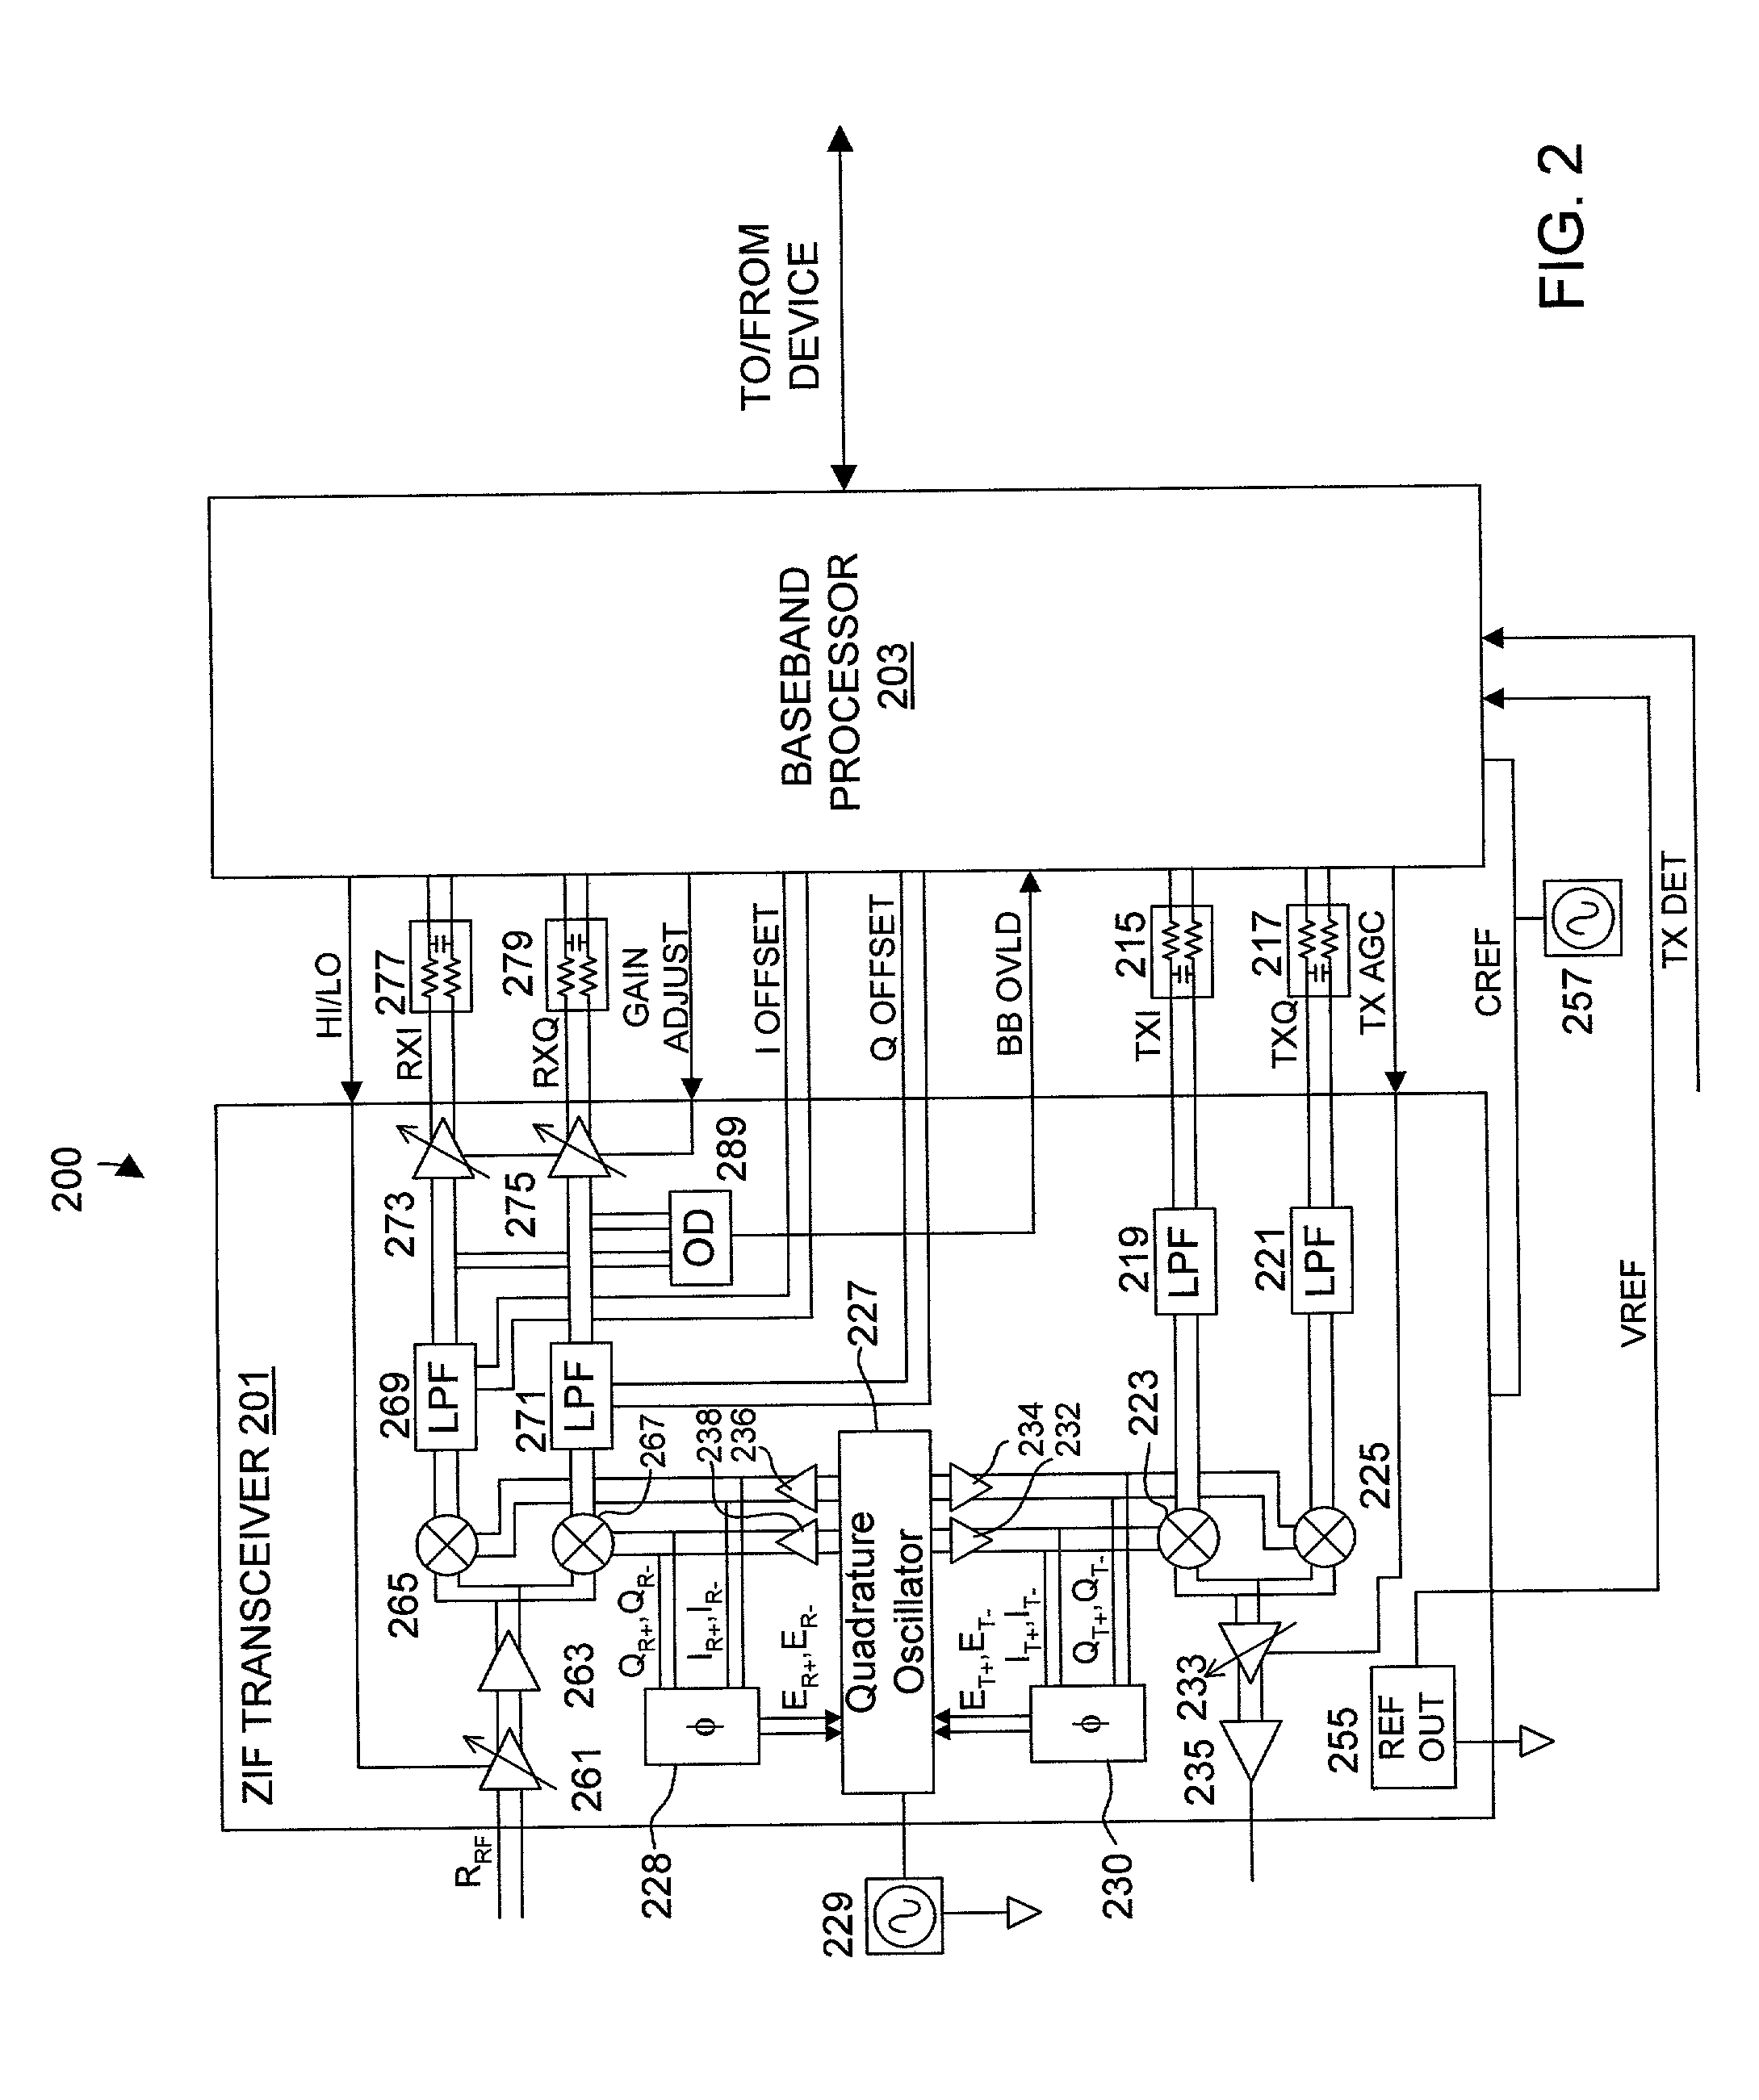 System and method for detecting and correcting phase error between differential signals